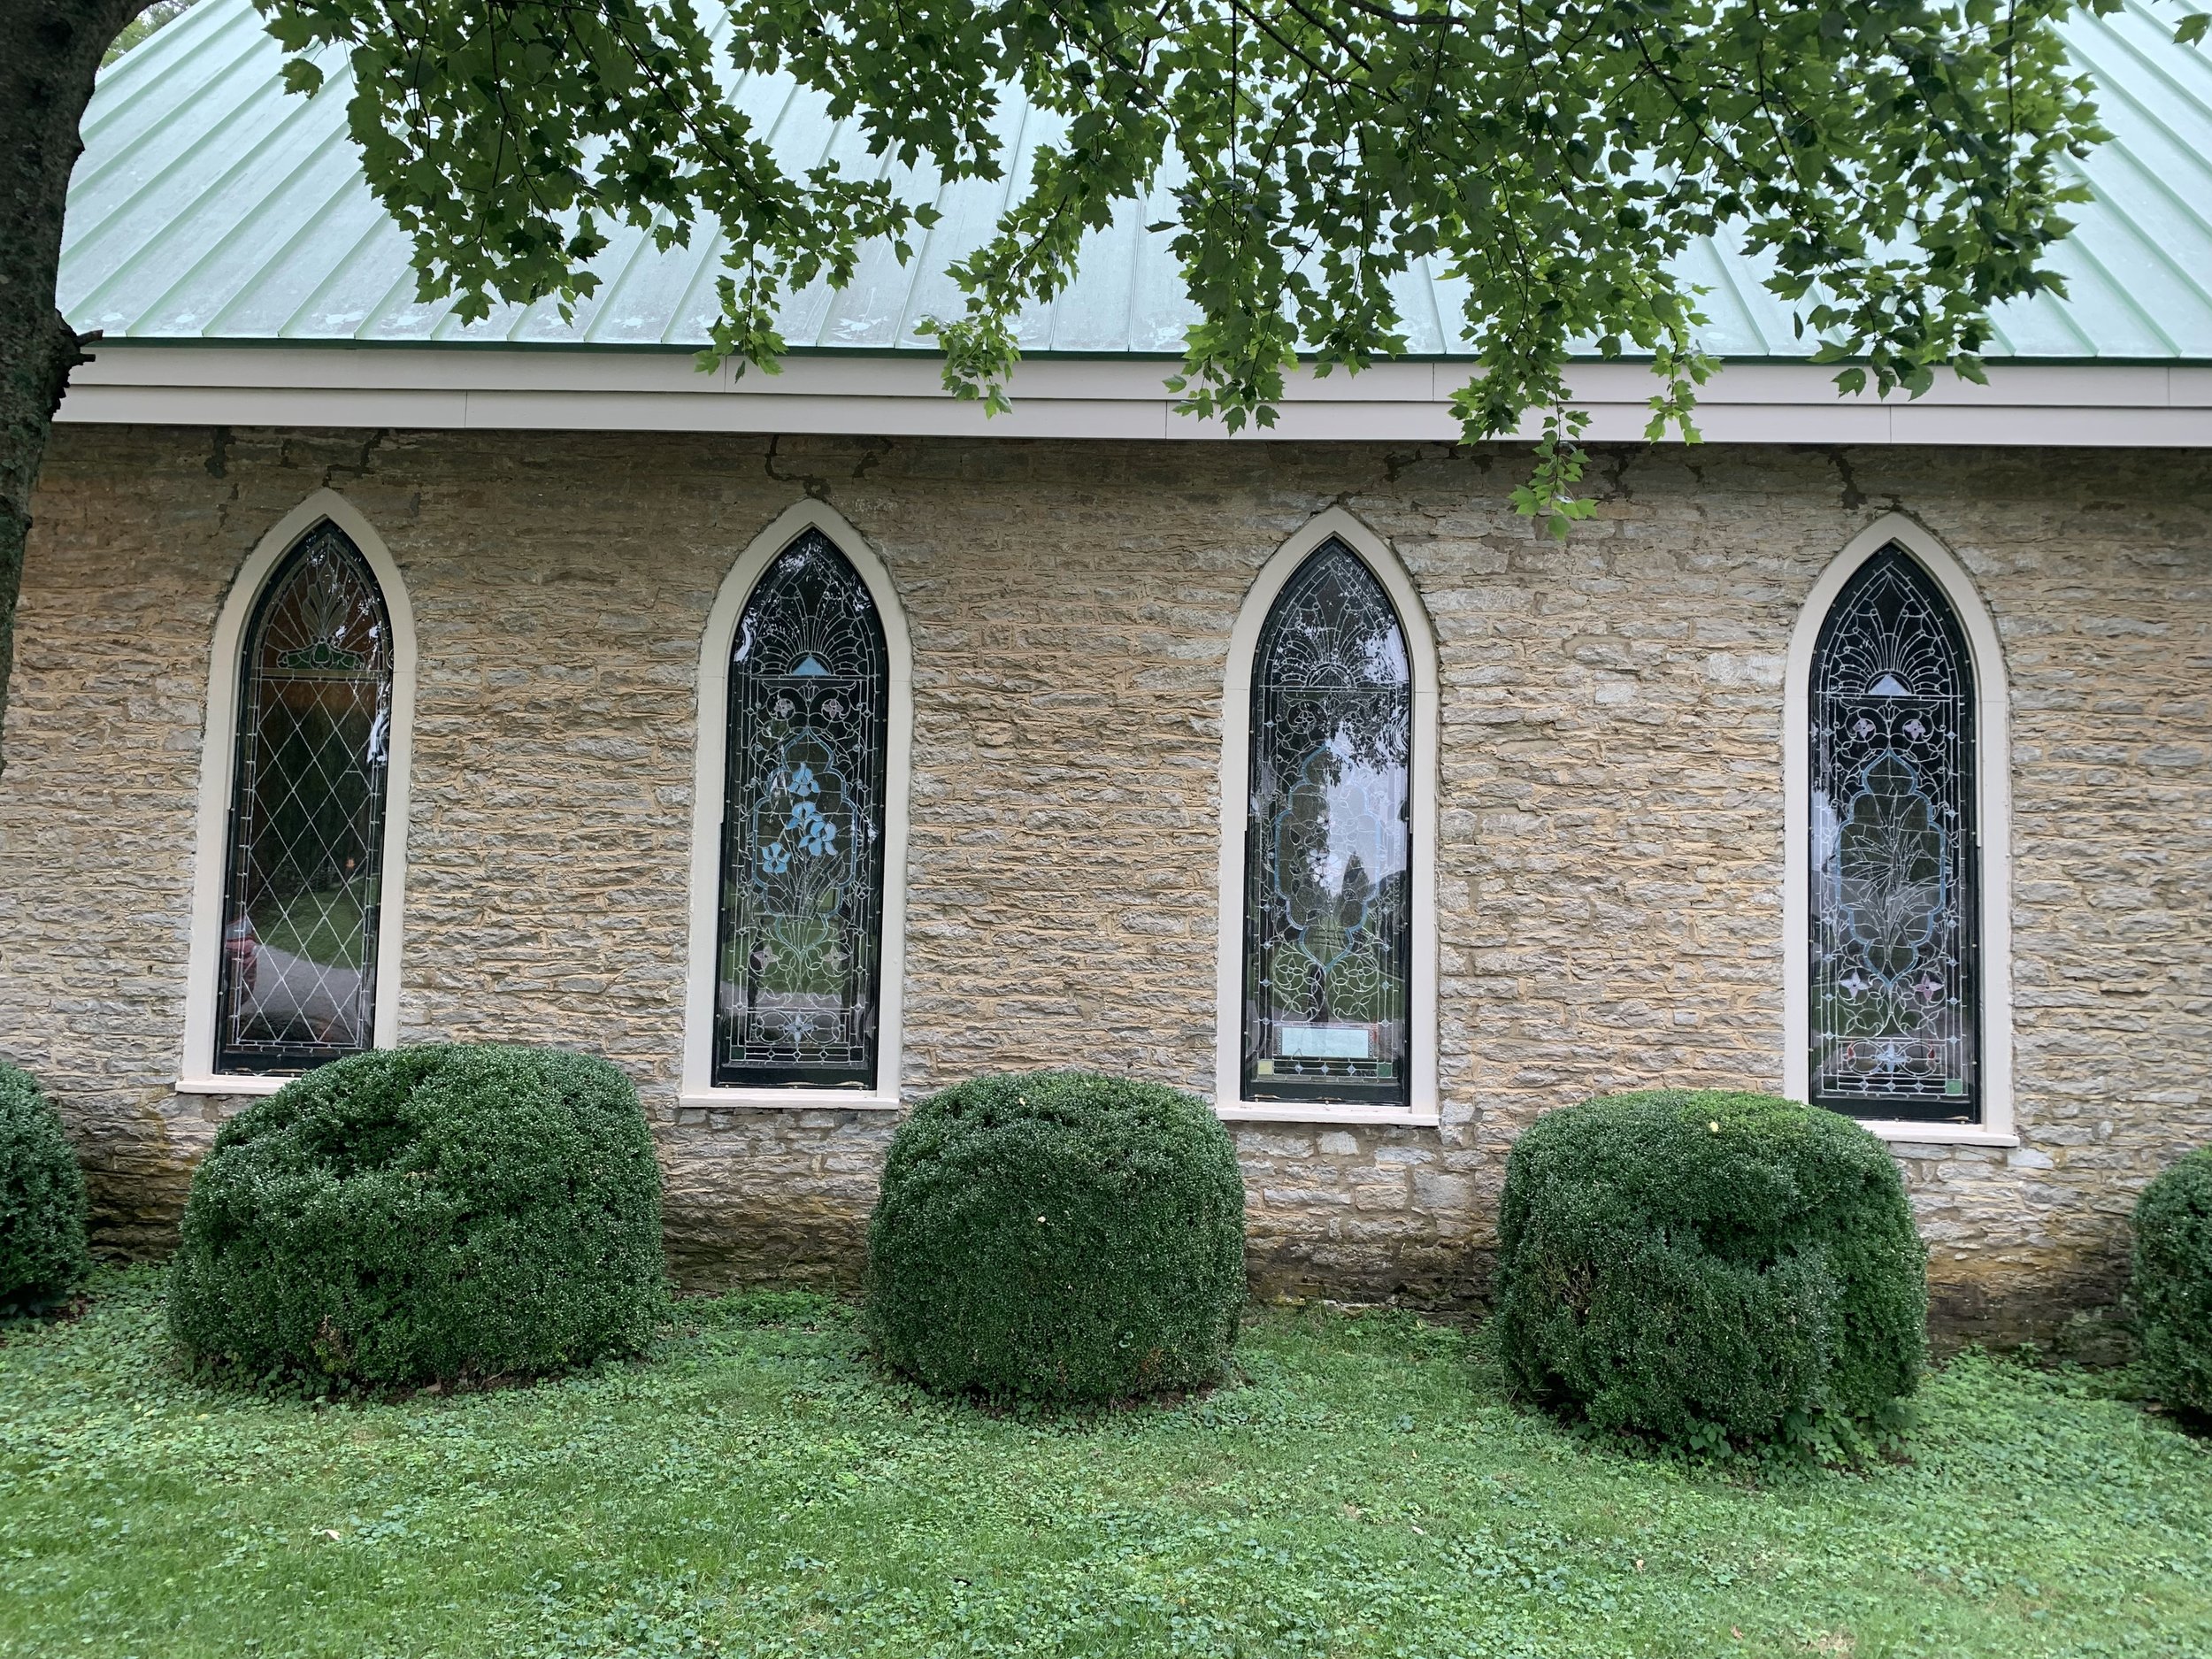 Side A of the Church with Stained Glass Windows